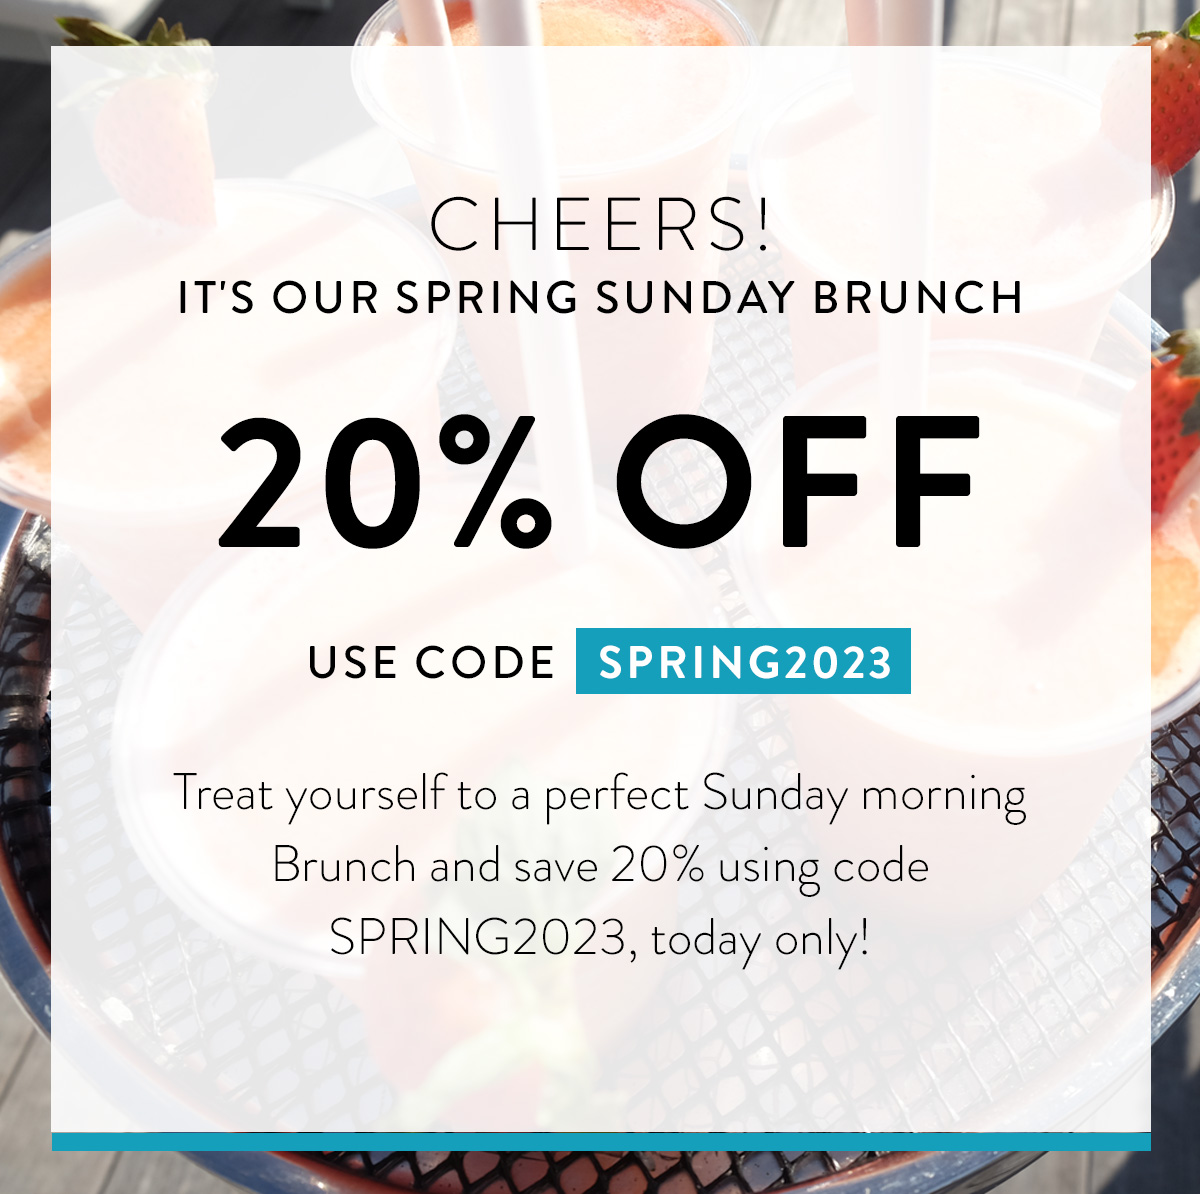 Cheers! It's our Spring Sunday Brunch 20% OFF USE CODE SPRING2023 Treat yourself to a perfect Sunday morning Brunch and save 20% using code SPRING2023, today only! Shop Now >